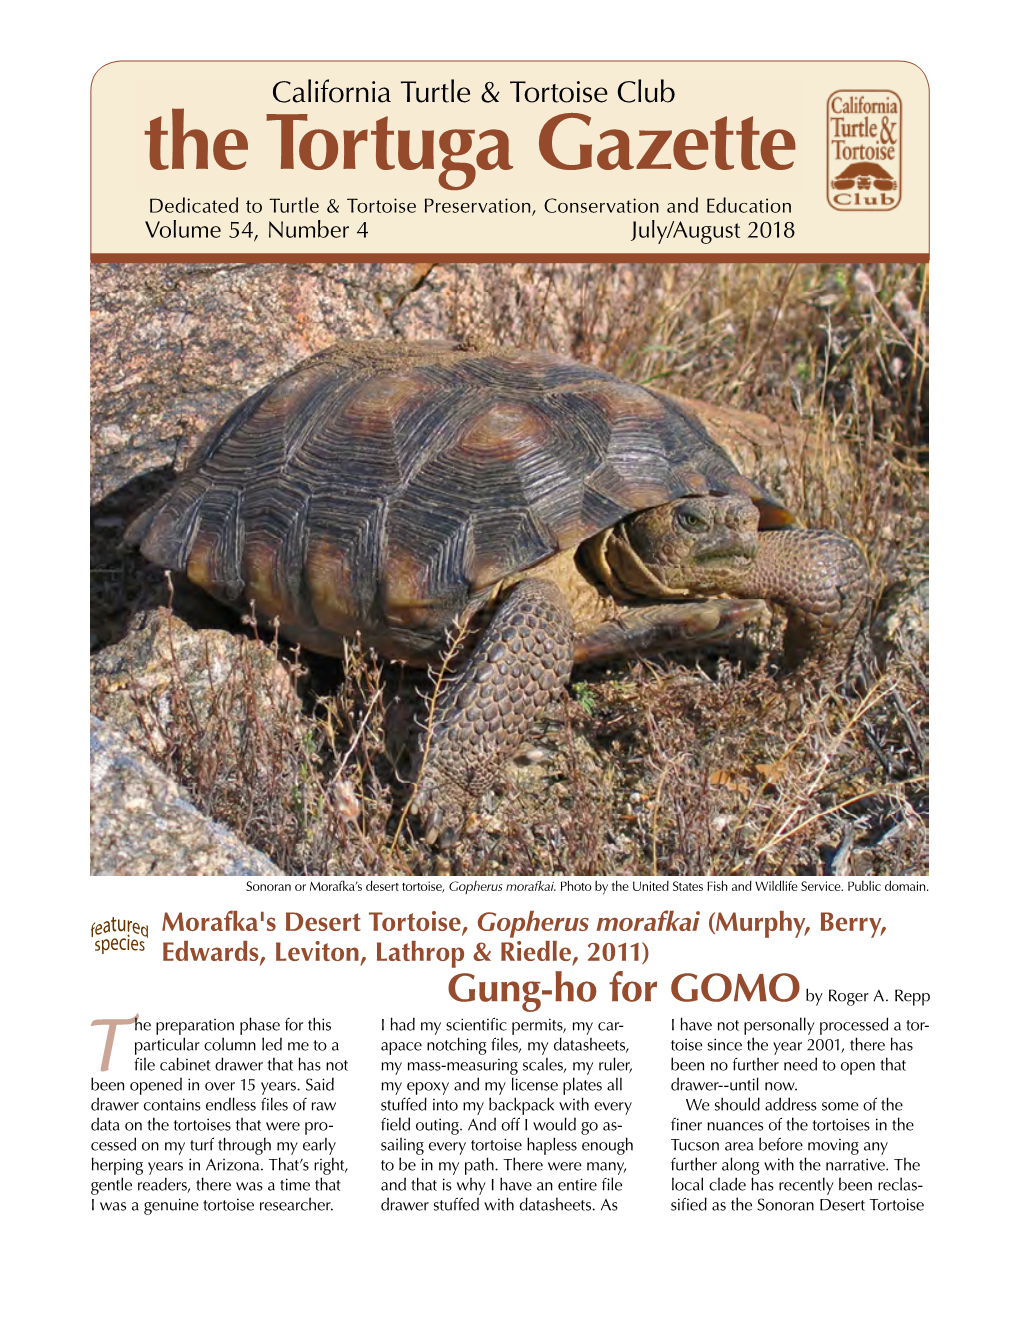 The Tortuga Gazette Dedicated to Turtle & Tortoise Preservation, Conservation and Education Volume 54, Number 4 July/August 2018